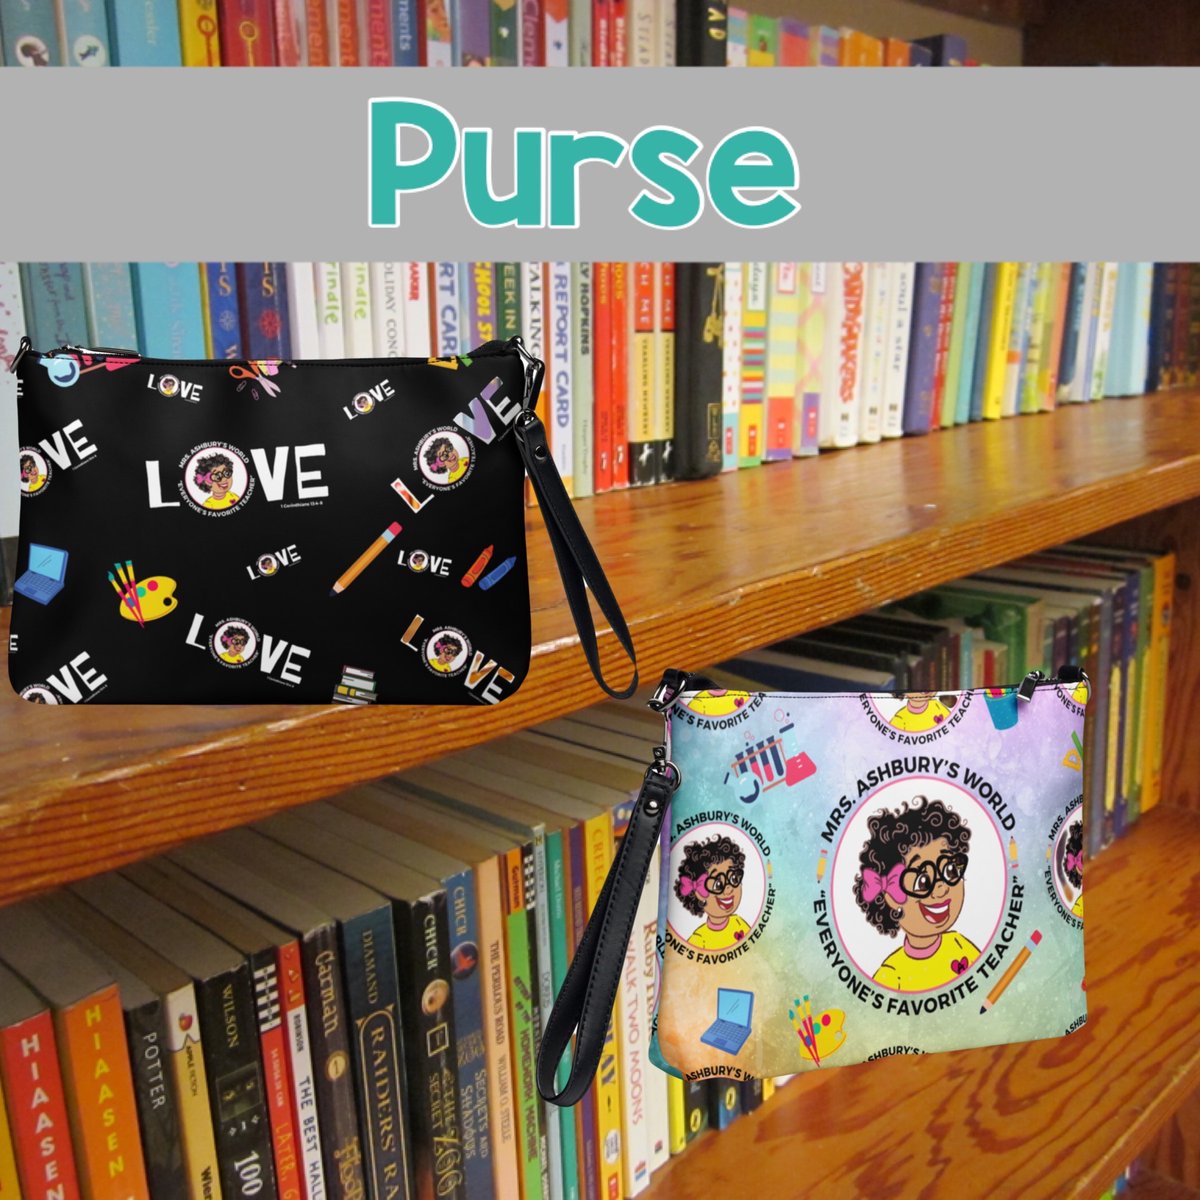 Yes, believe your eyes! #mrsashburysworld purse. Wear it as a crossbody or clutch. Perfect for the young #scholar in your life or for yourself ❤️.  #authorrekiabeverly
#mrsashbury #purse #kidsaccessories #accessories #outfits